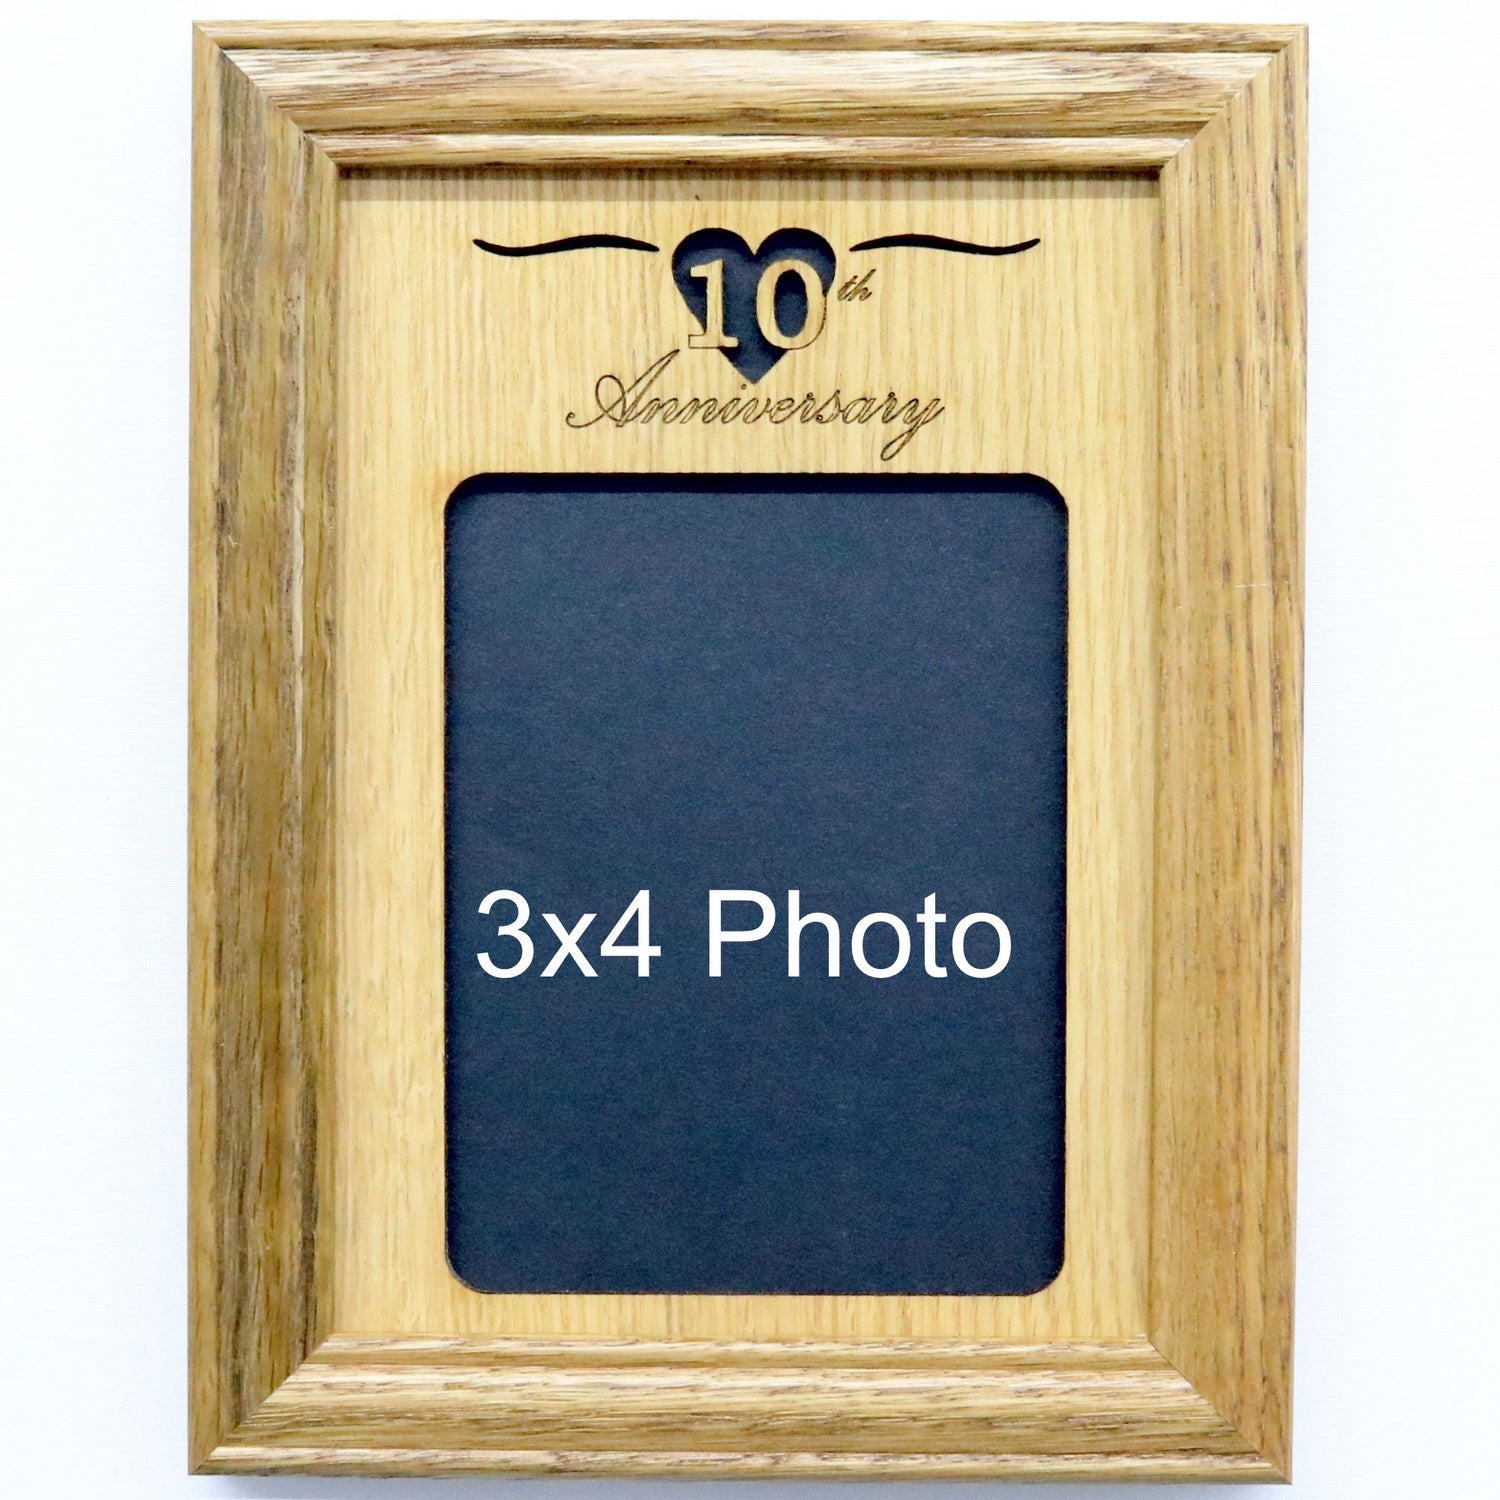 5x7 10th Anniversary Picture Frame holds a 3x4 Photo and can be personalized with your names.